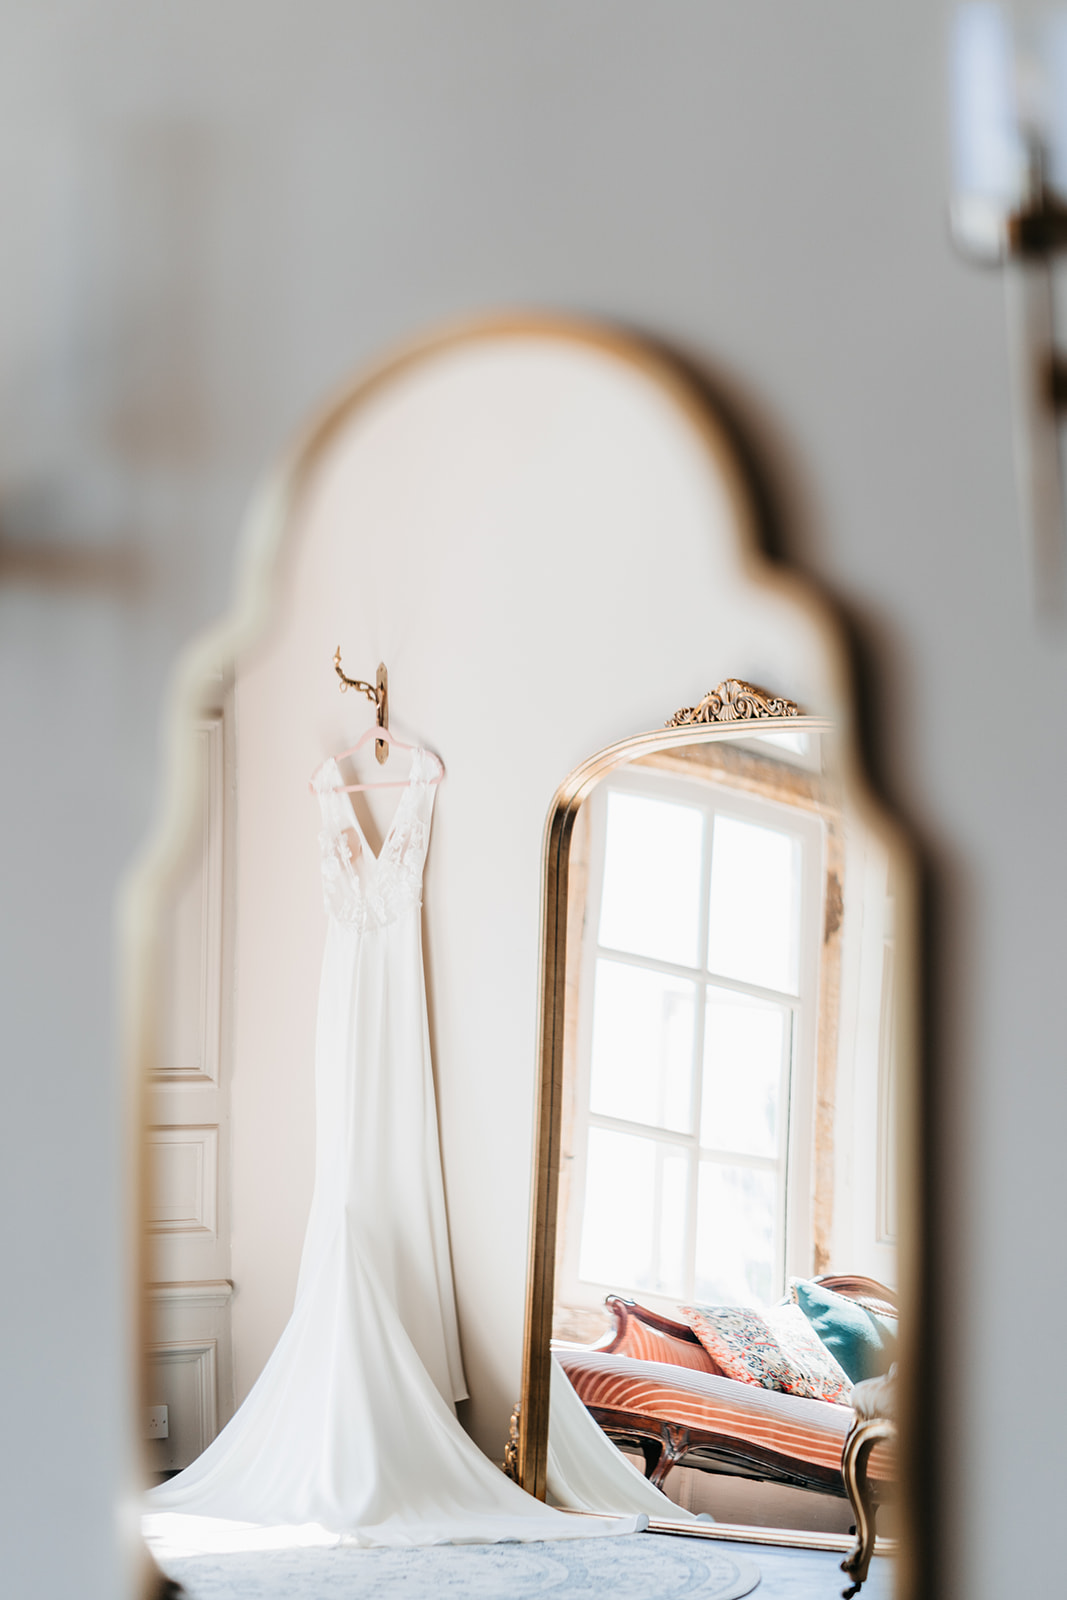 The brides dress hanging during the bridal prep